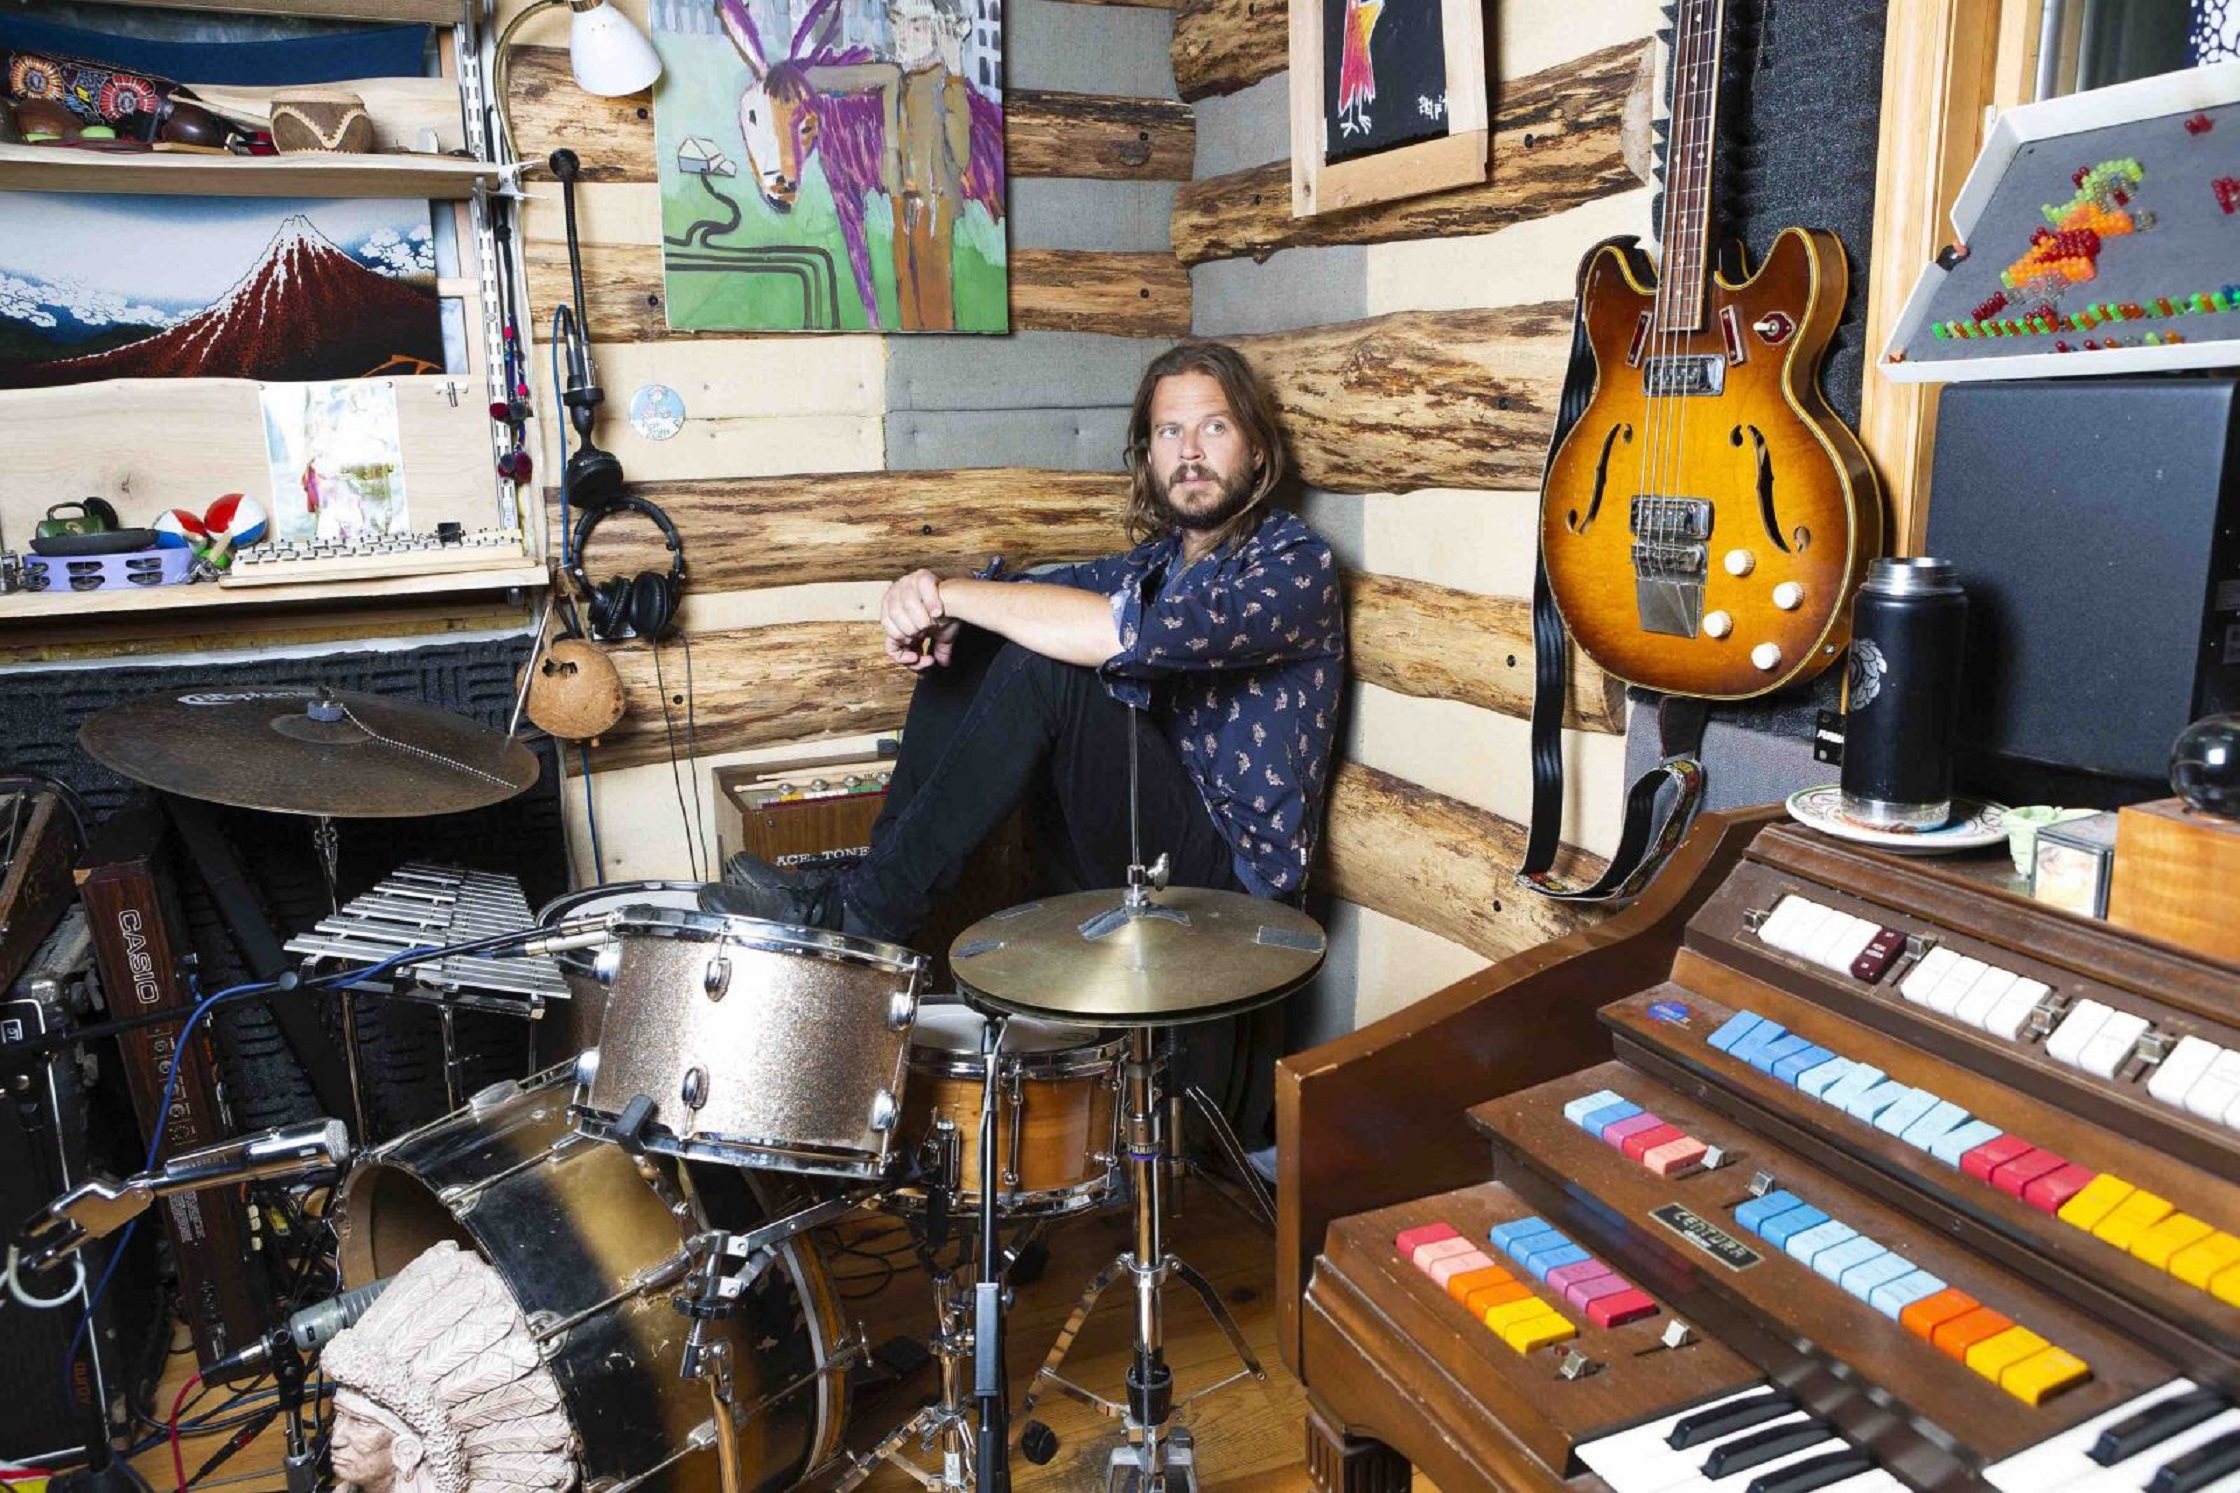 Marco Benevento Shares "Do You Want Some Magic" - Latest Single From New LP Out June 10